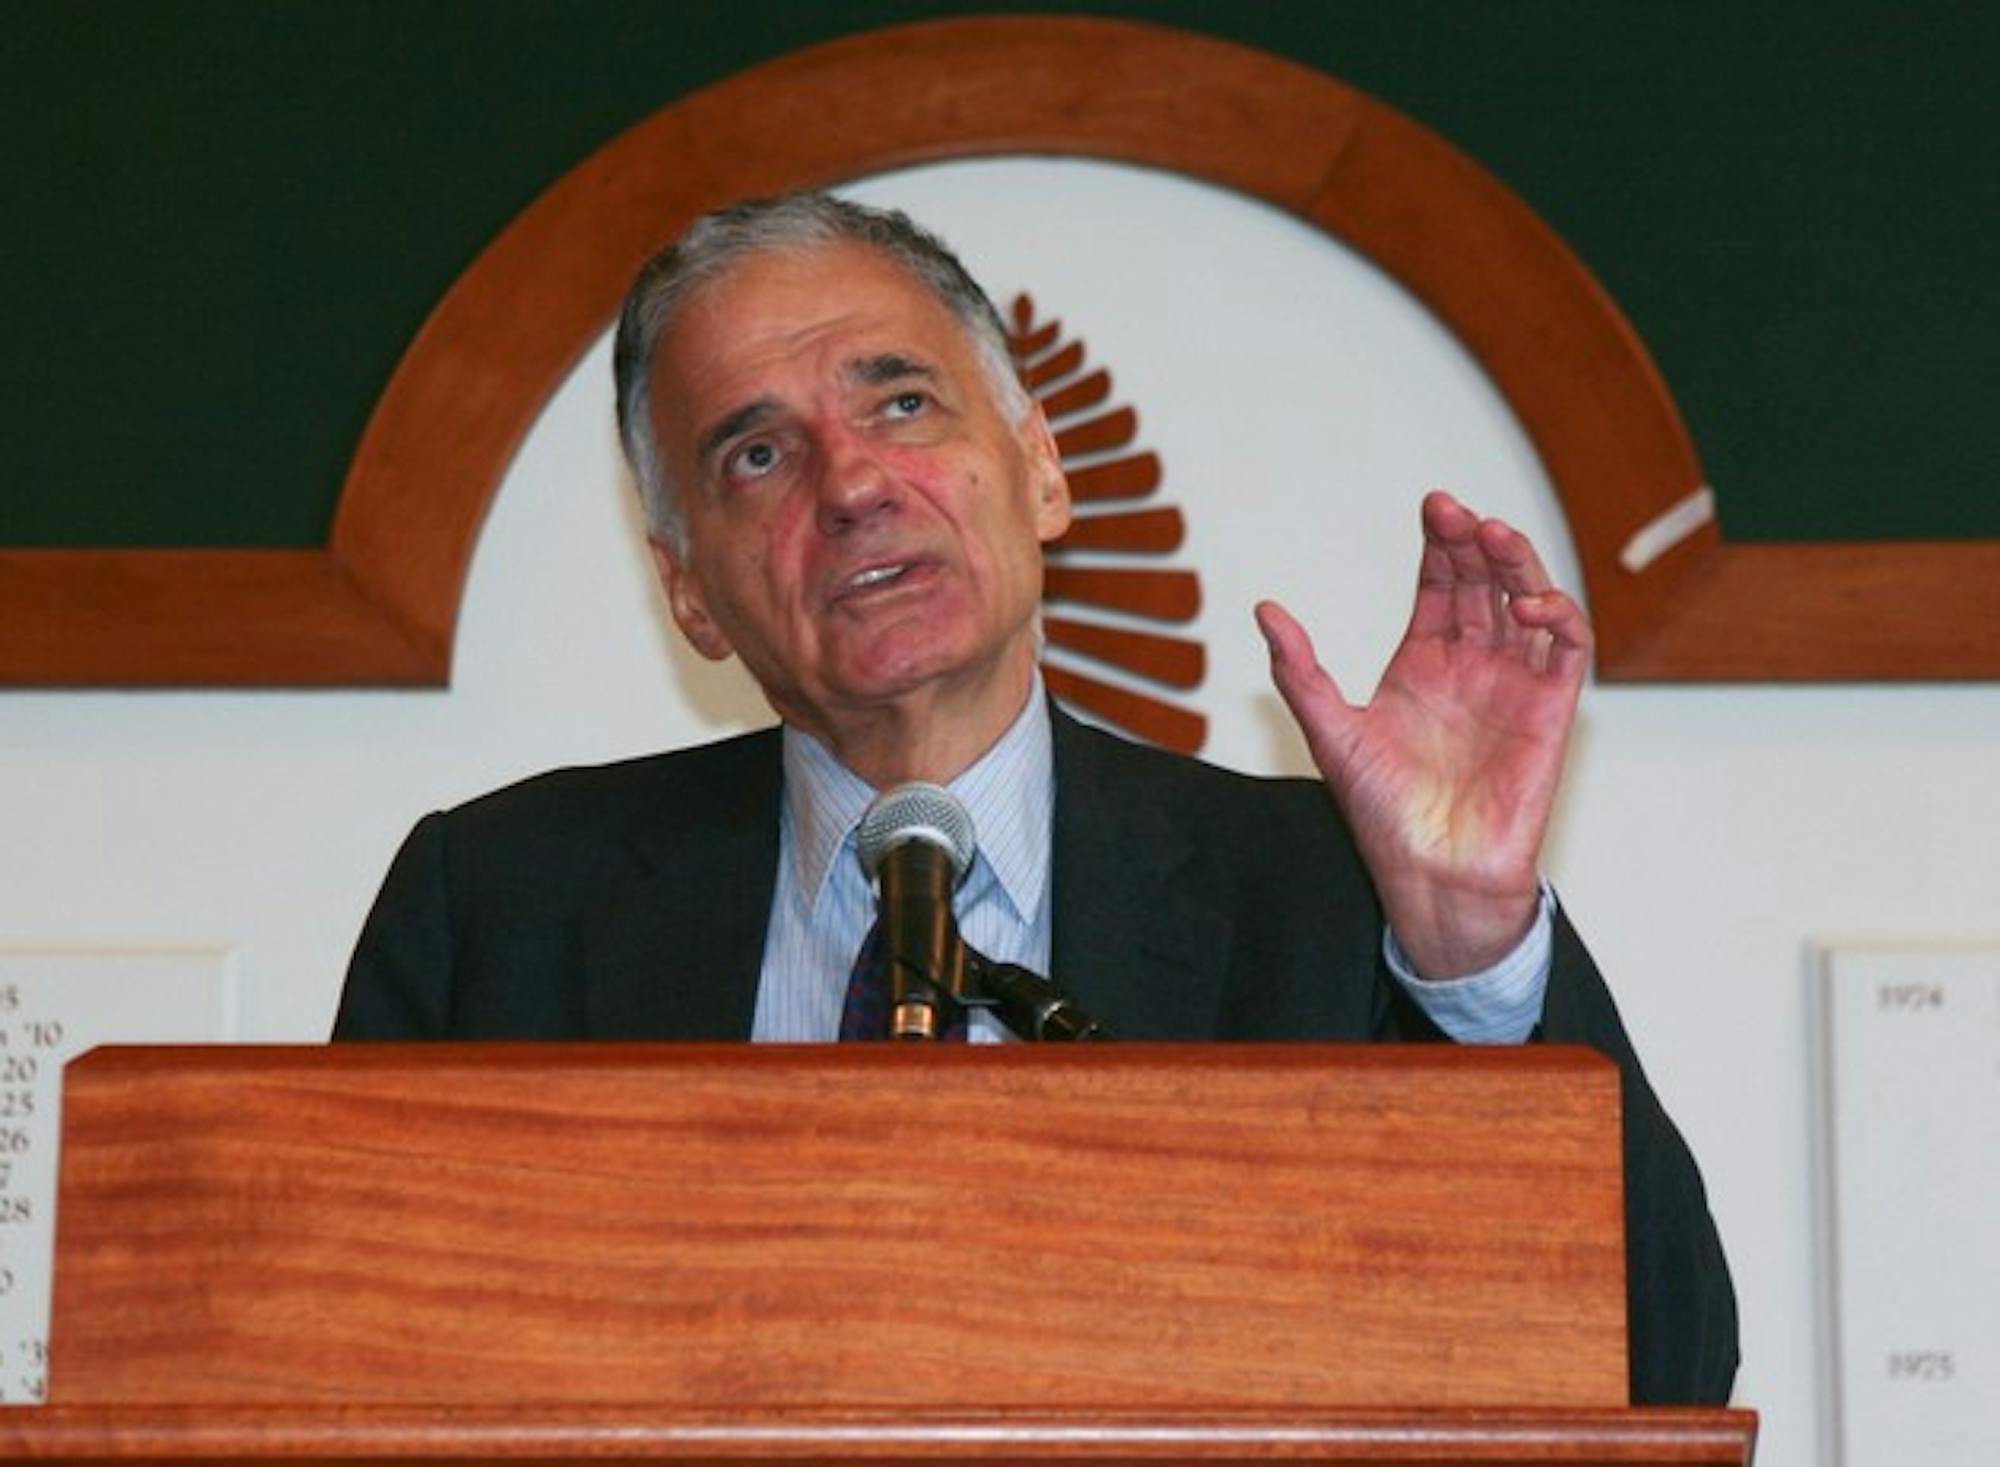 Ralph Nader, 2008 independent candidate for president, spoke on Monday about his candidacy, the government's bailout and his competition.